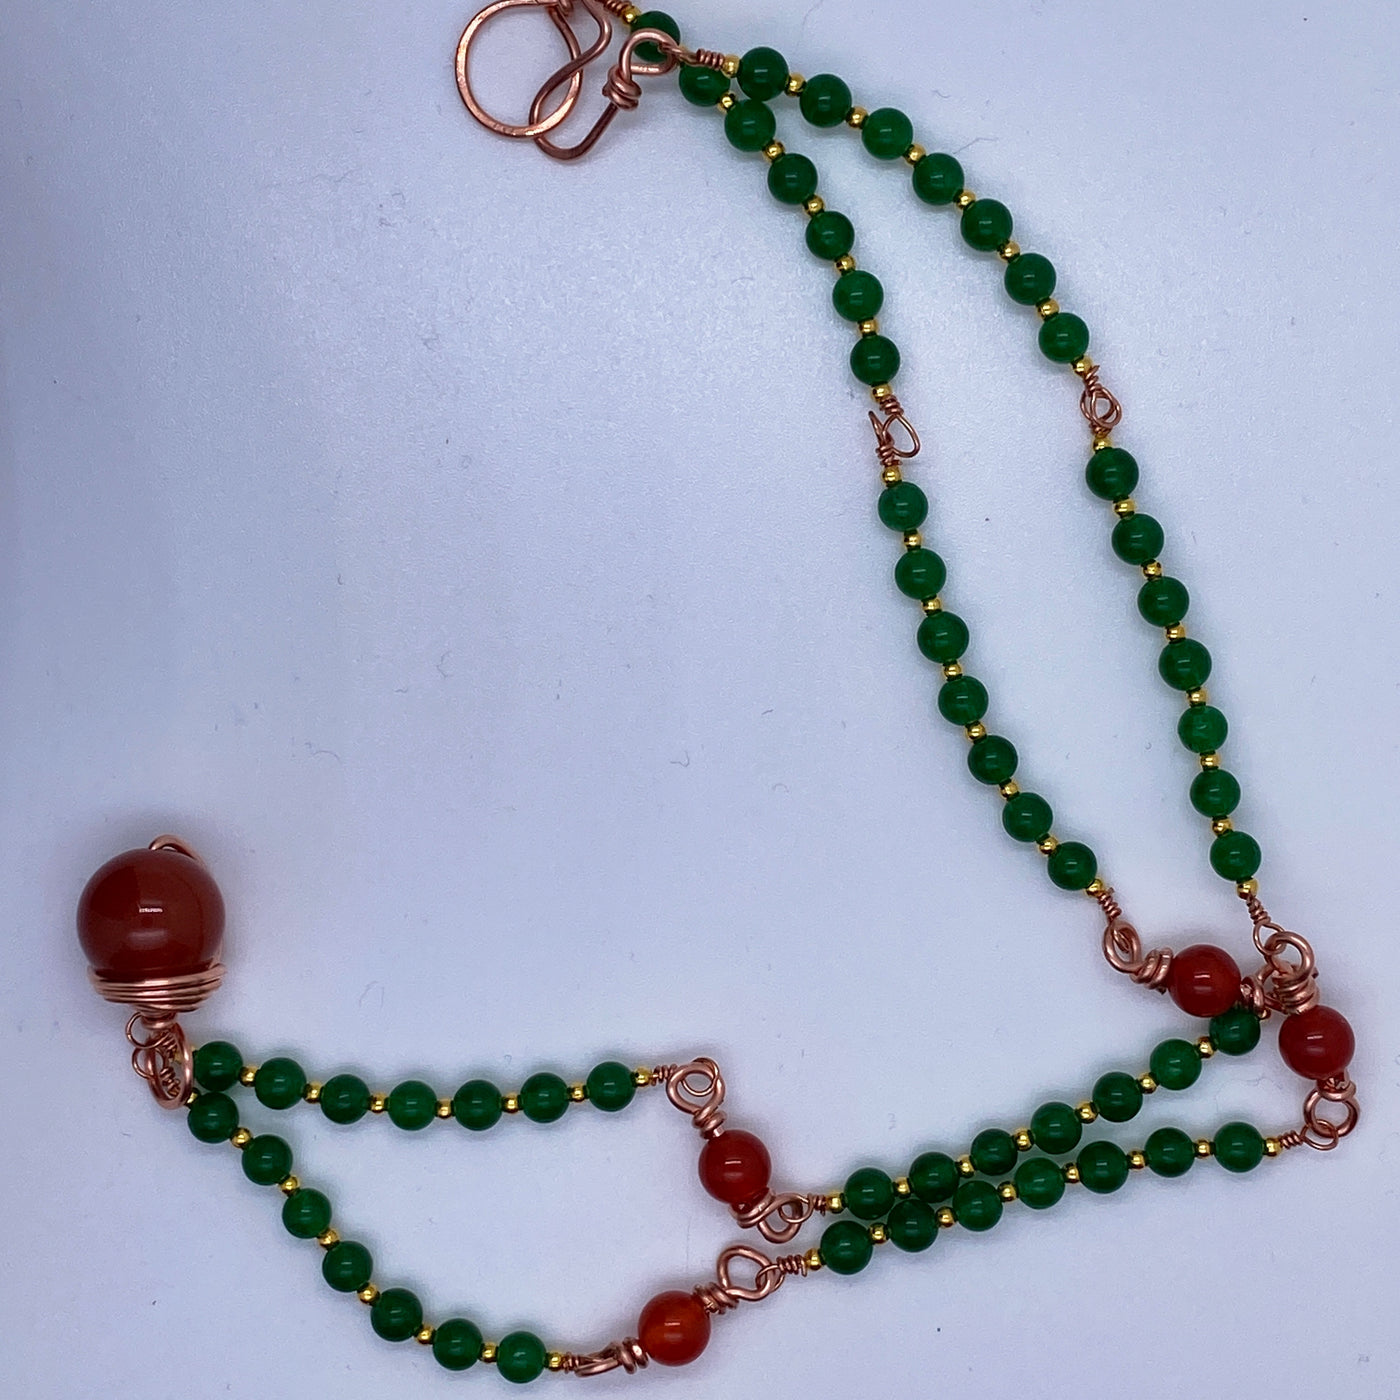 Green calchedony small pearls and red agate big ones for copper necklace